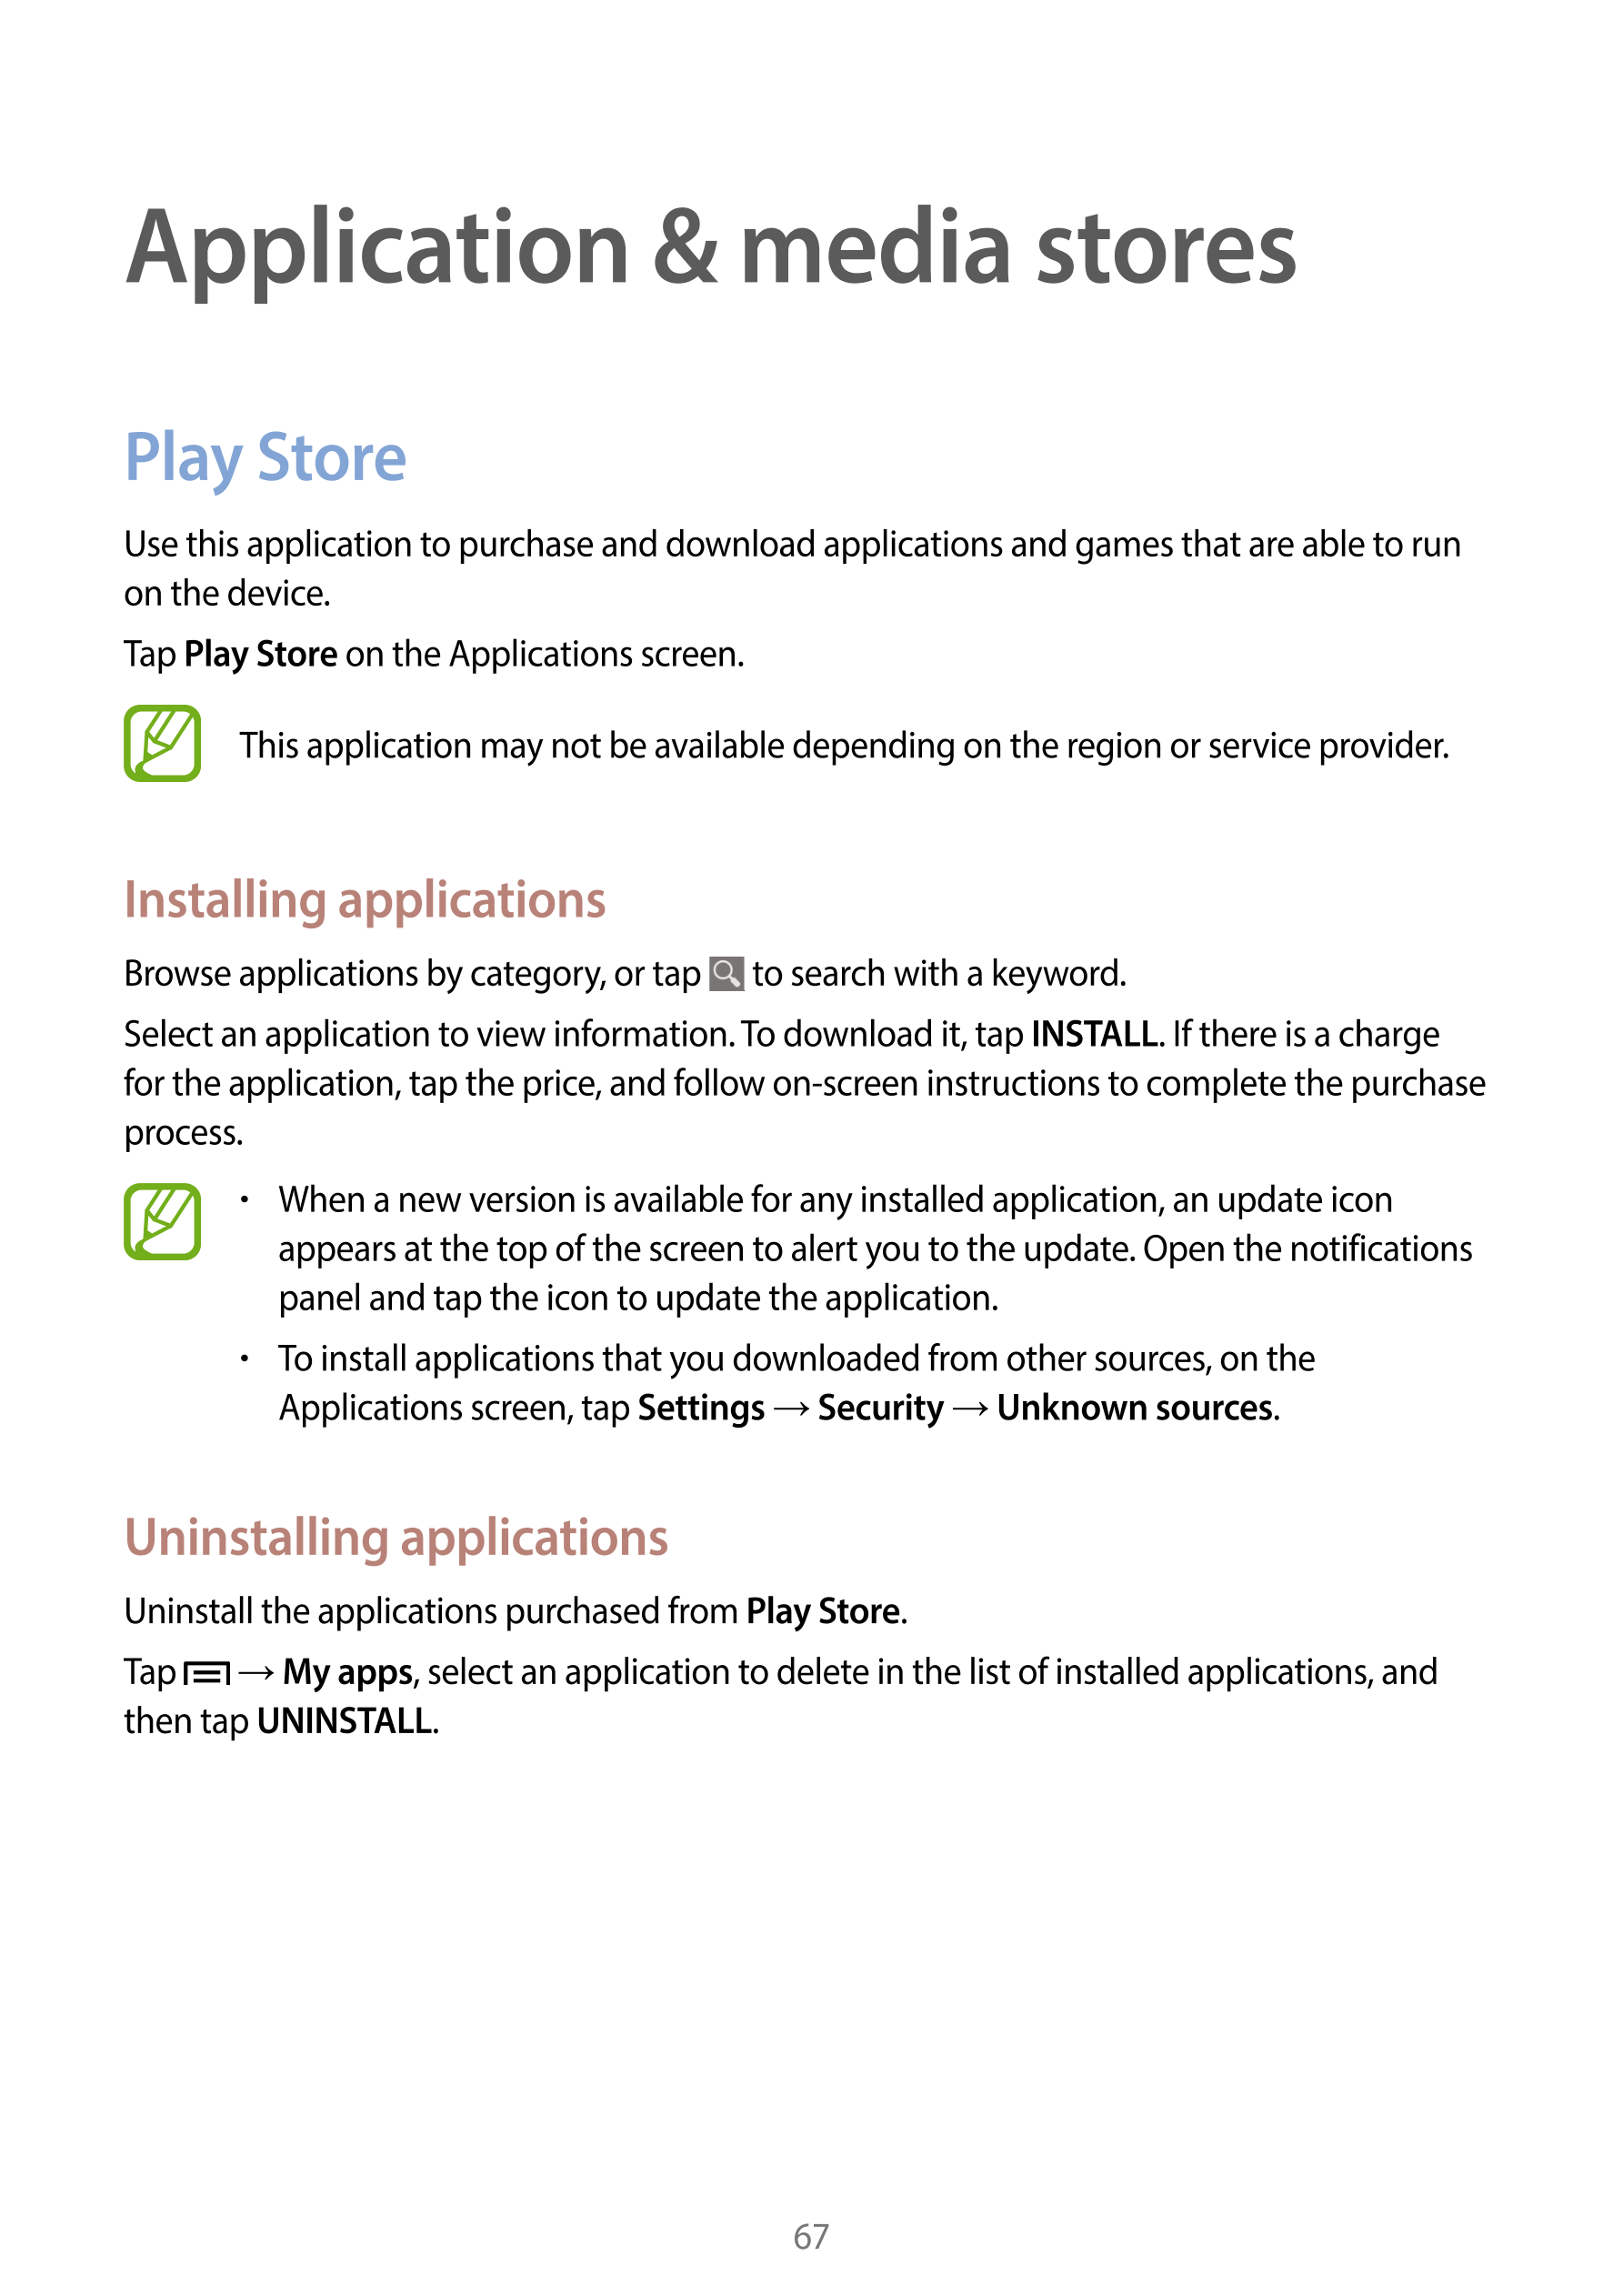 Application & media stores
Play Store
Use this application to purchase and download applications and games that are able to run 